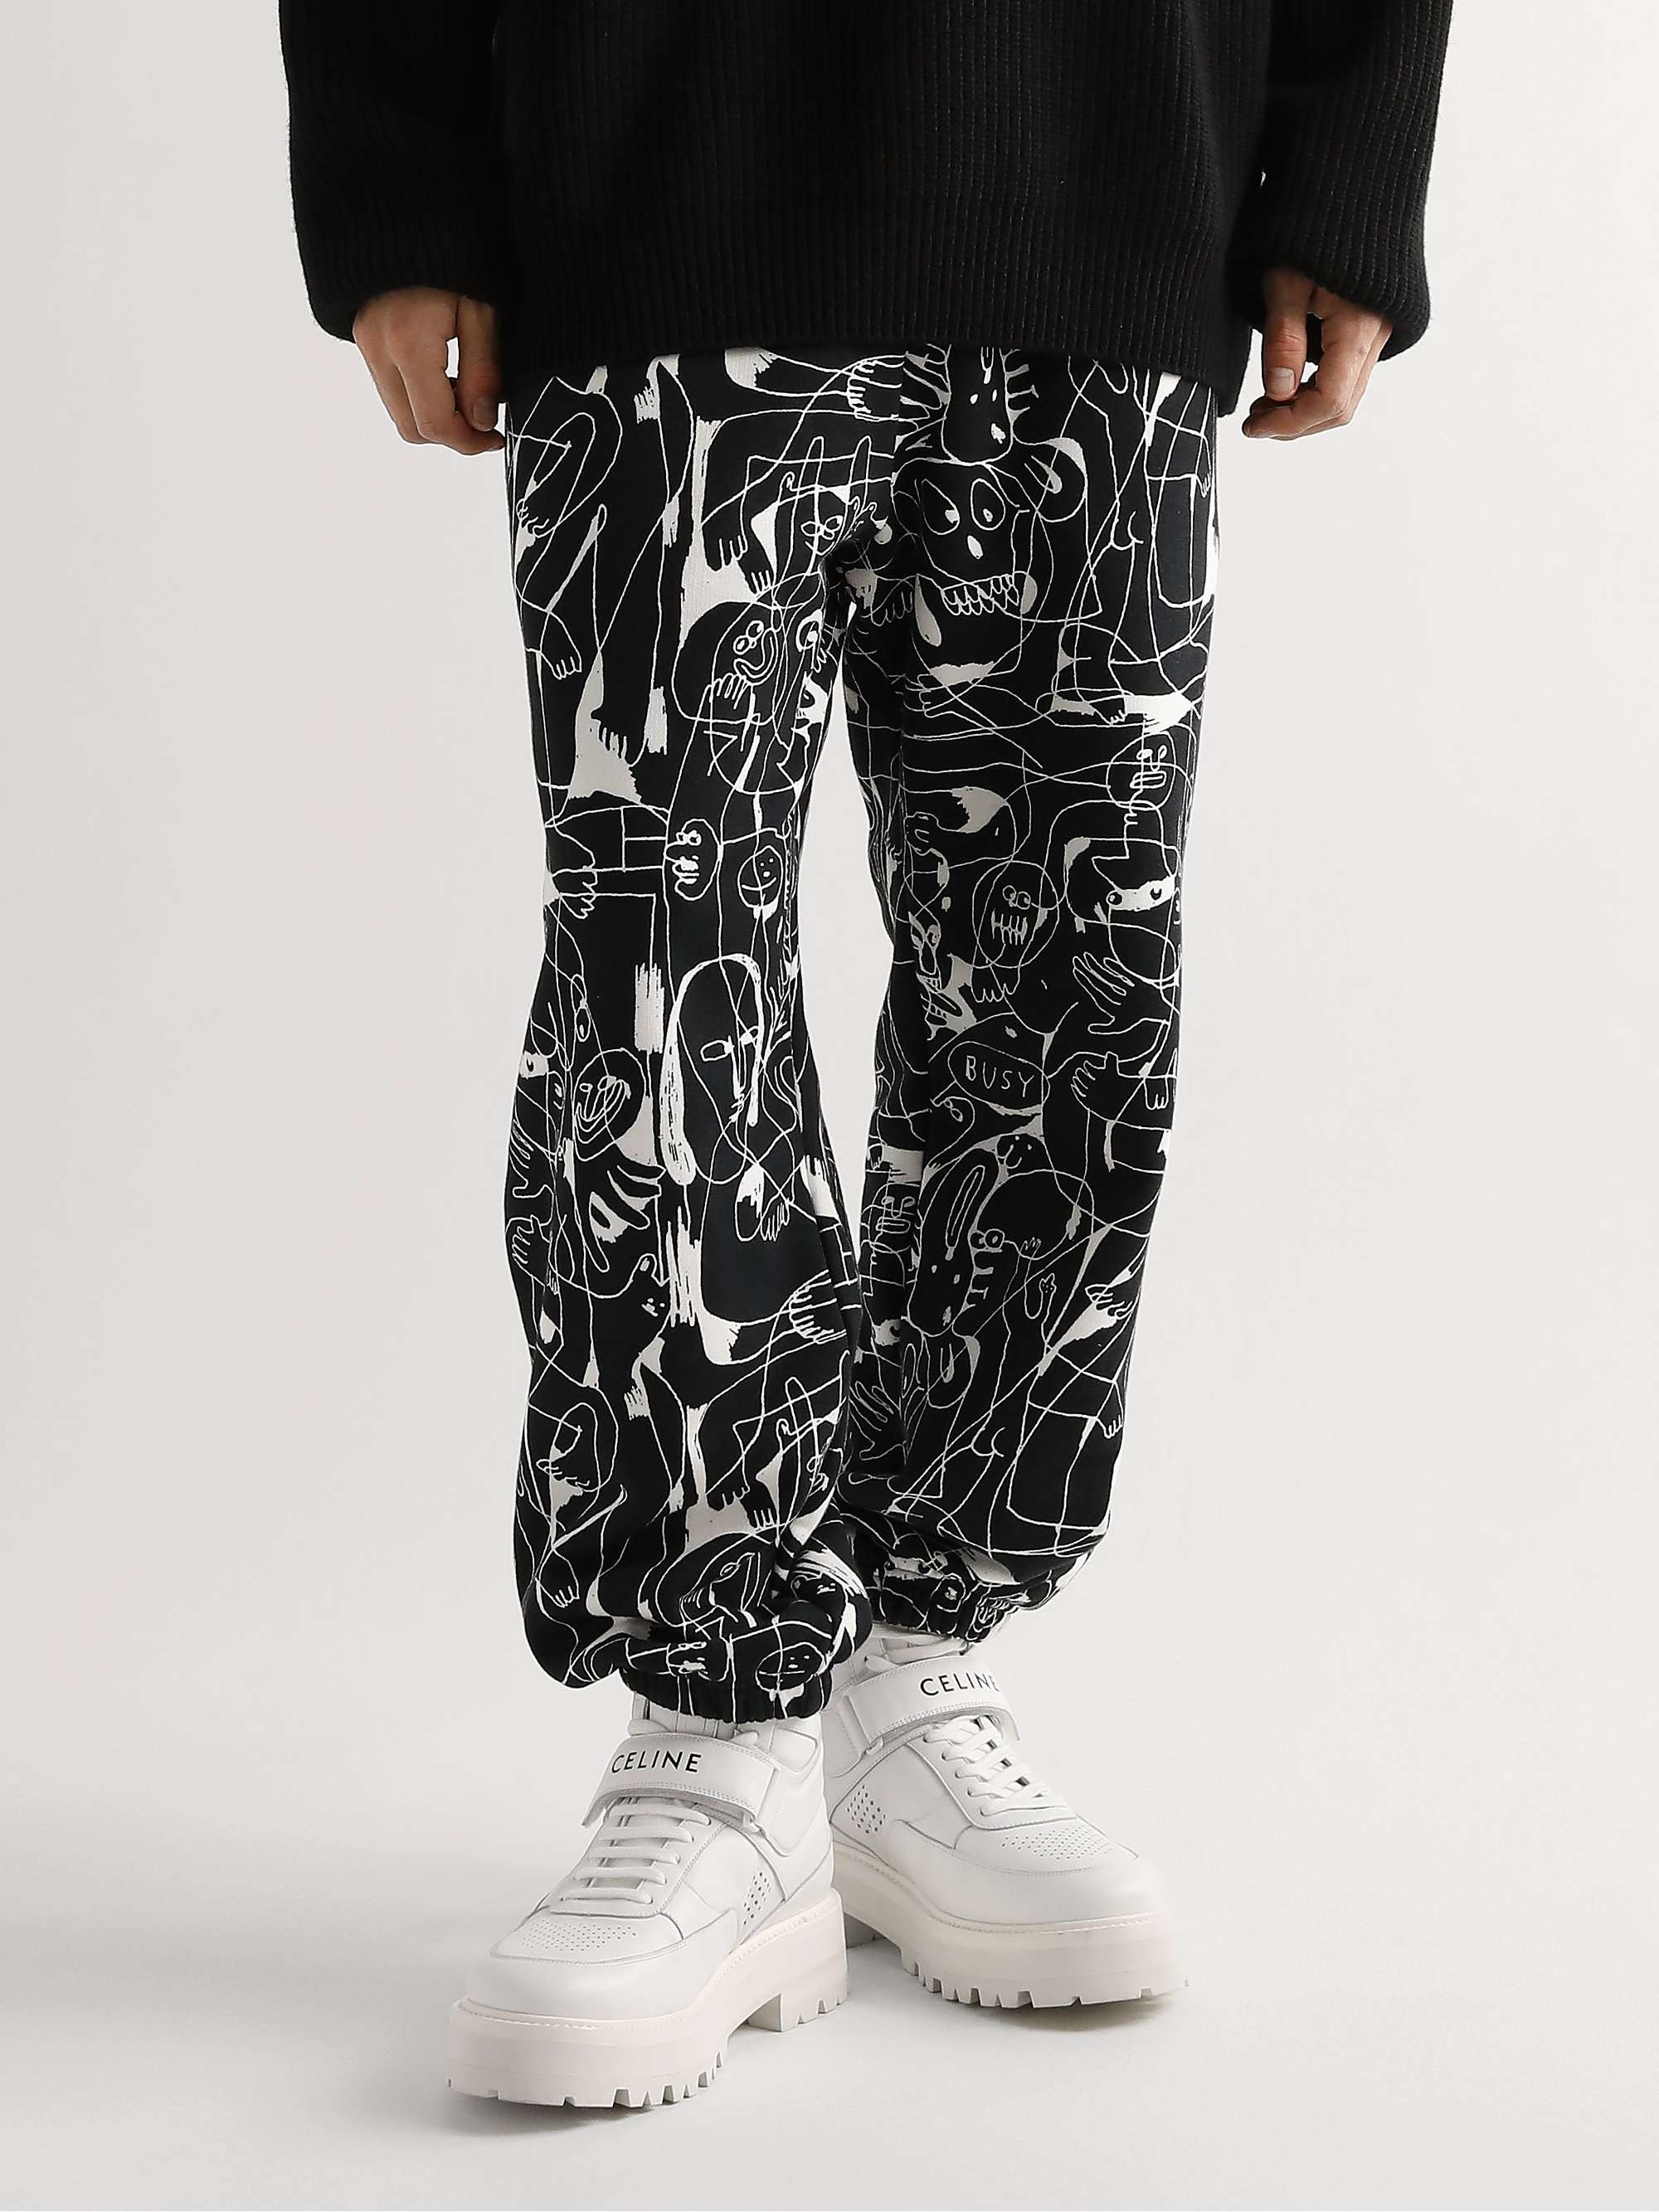 CELINE HOMME Tapered Printed Cotton-Jersey Sweatpants